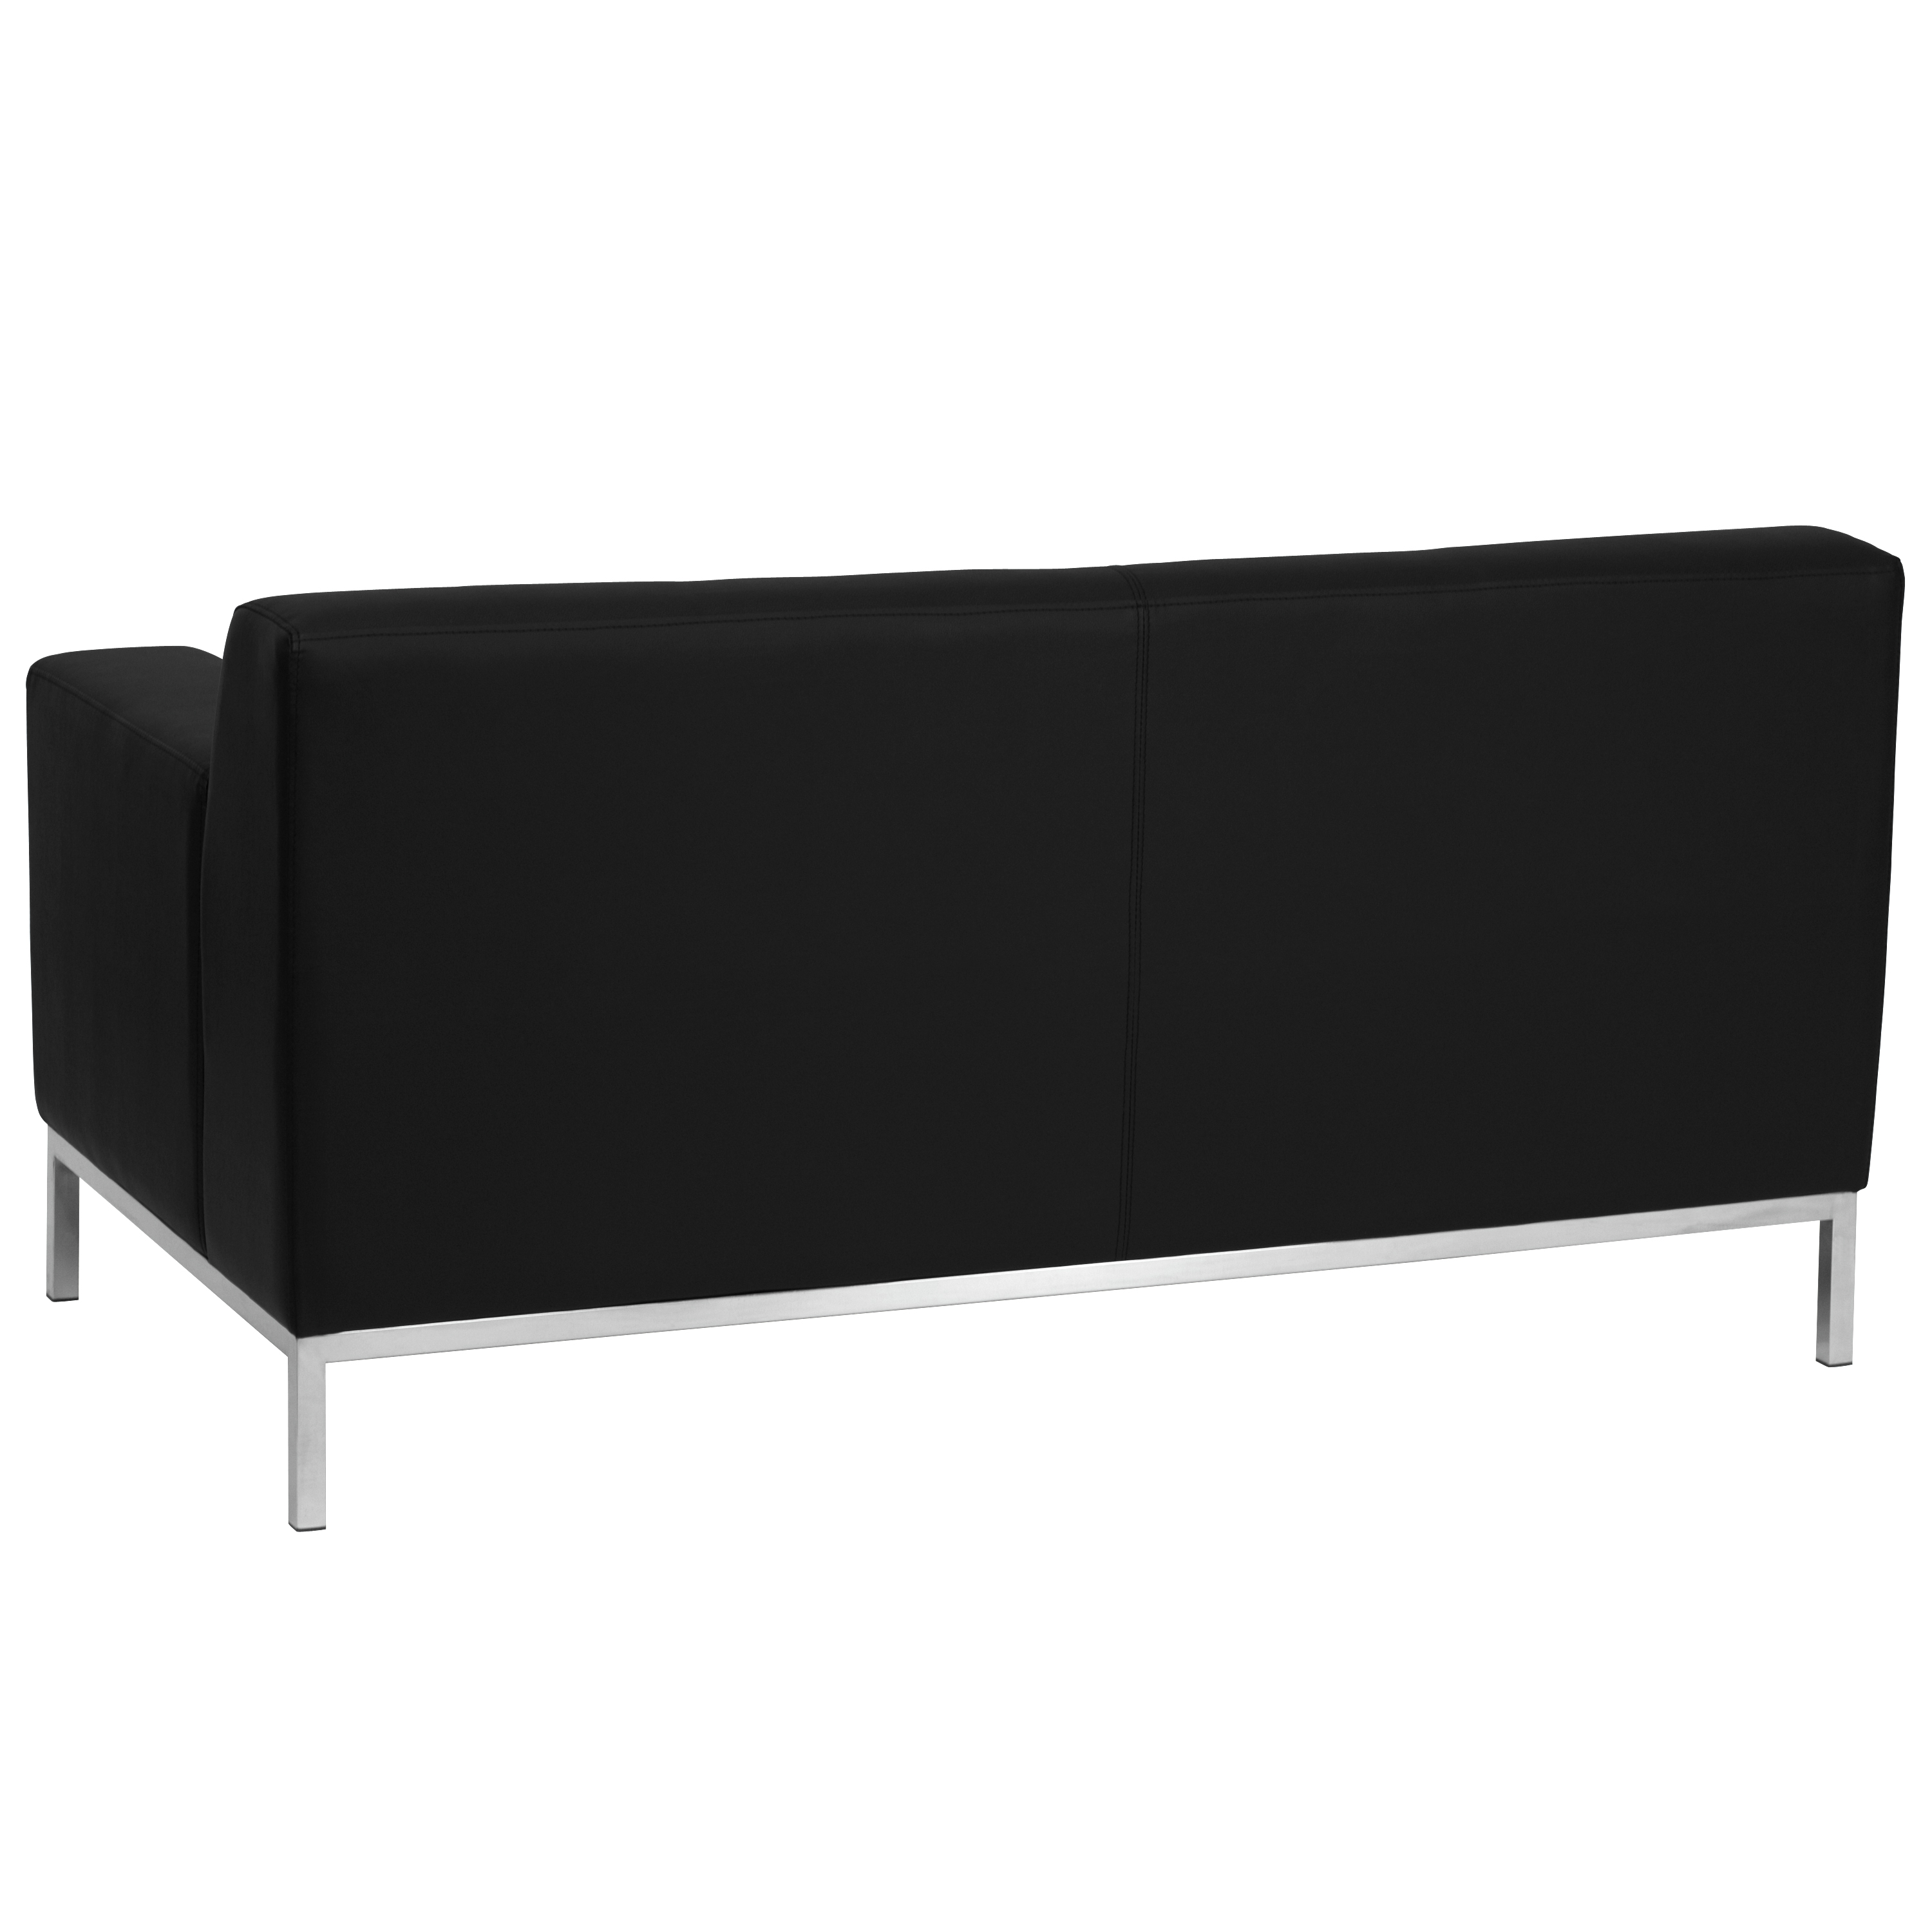 Flash Furniture HERCULES Definity Series Contemporary Black LeatherSoft Loveseat - image 5 of 5